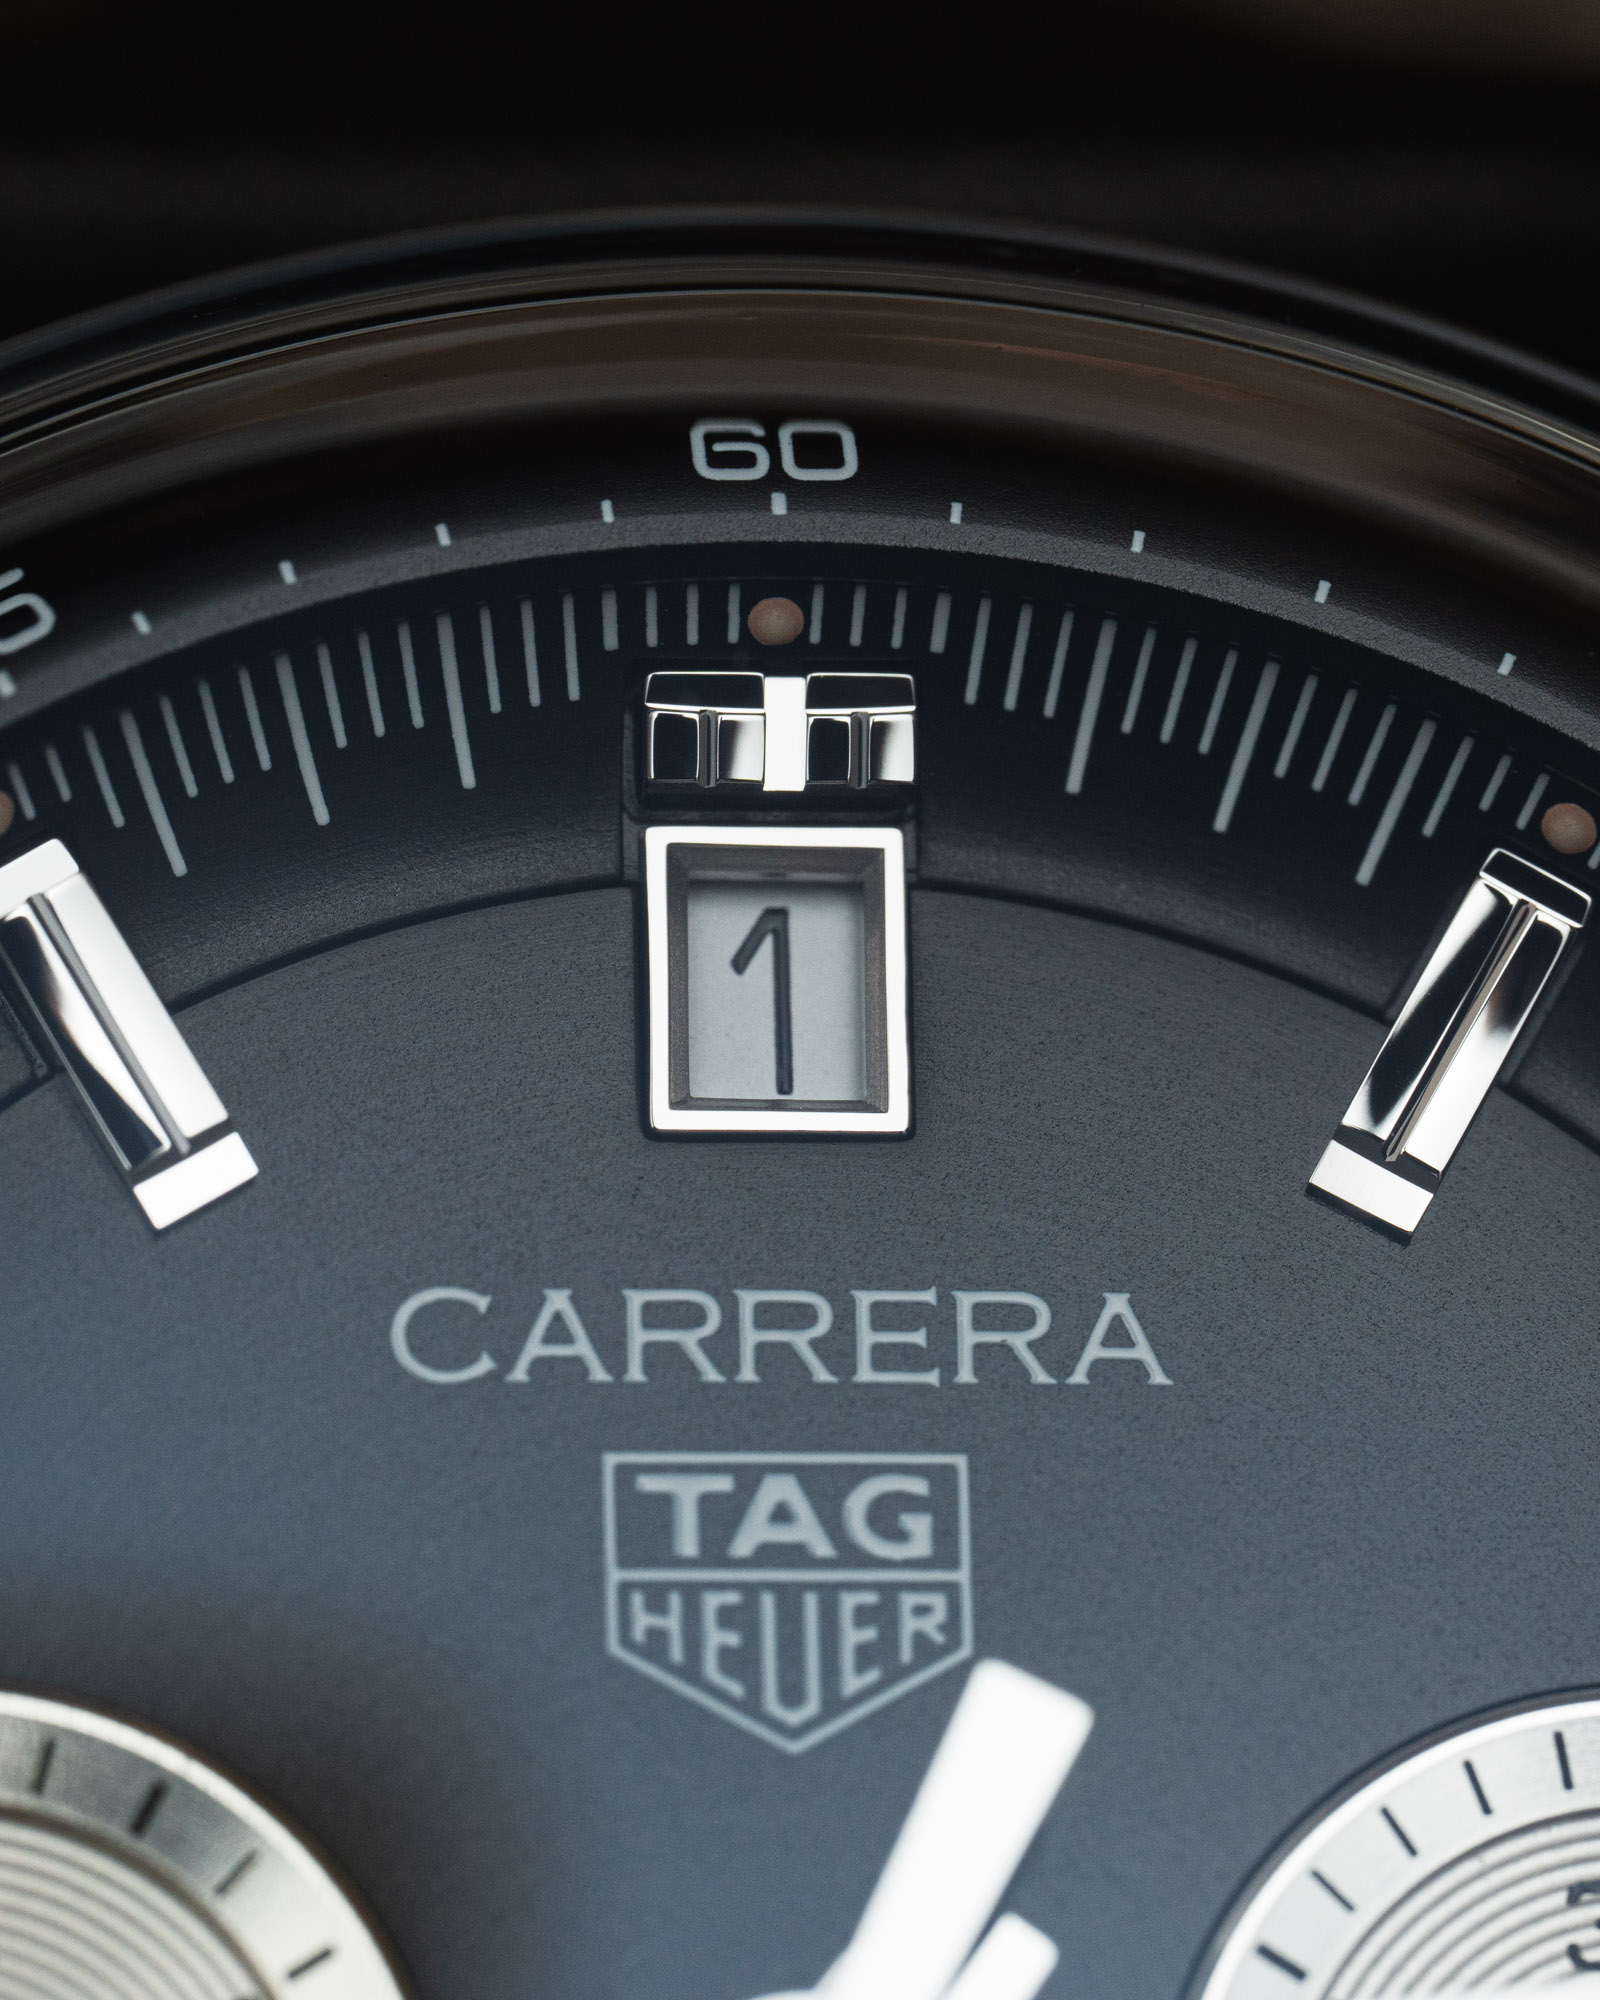 Introducing The 39mm TAG Heuer Carrera Chronograph Glassbox (Live